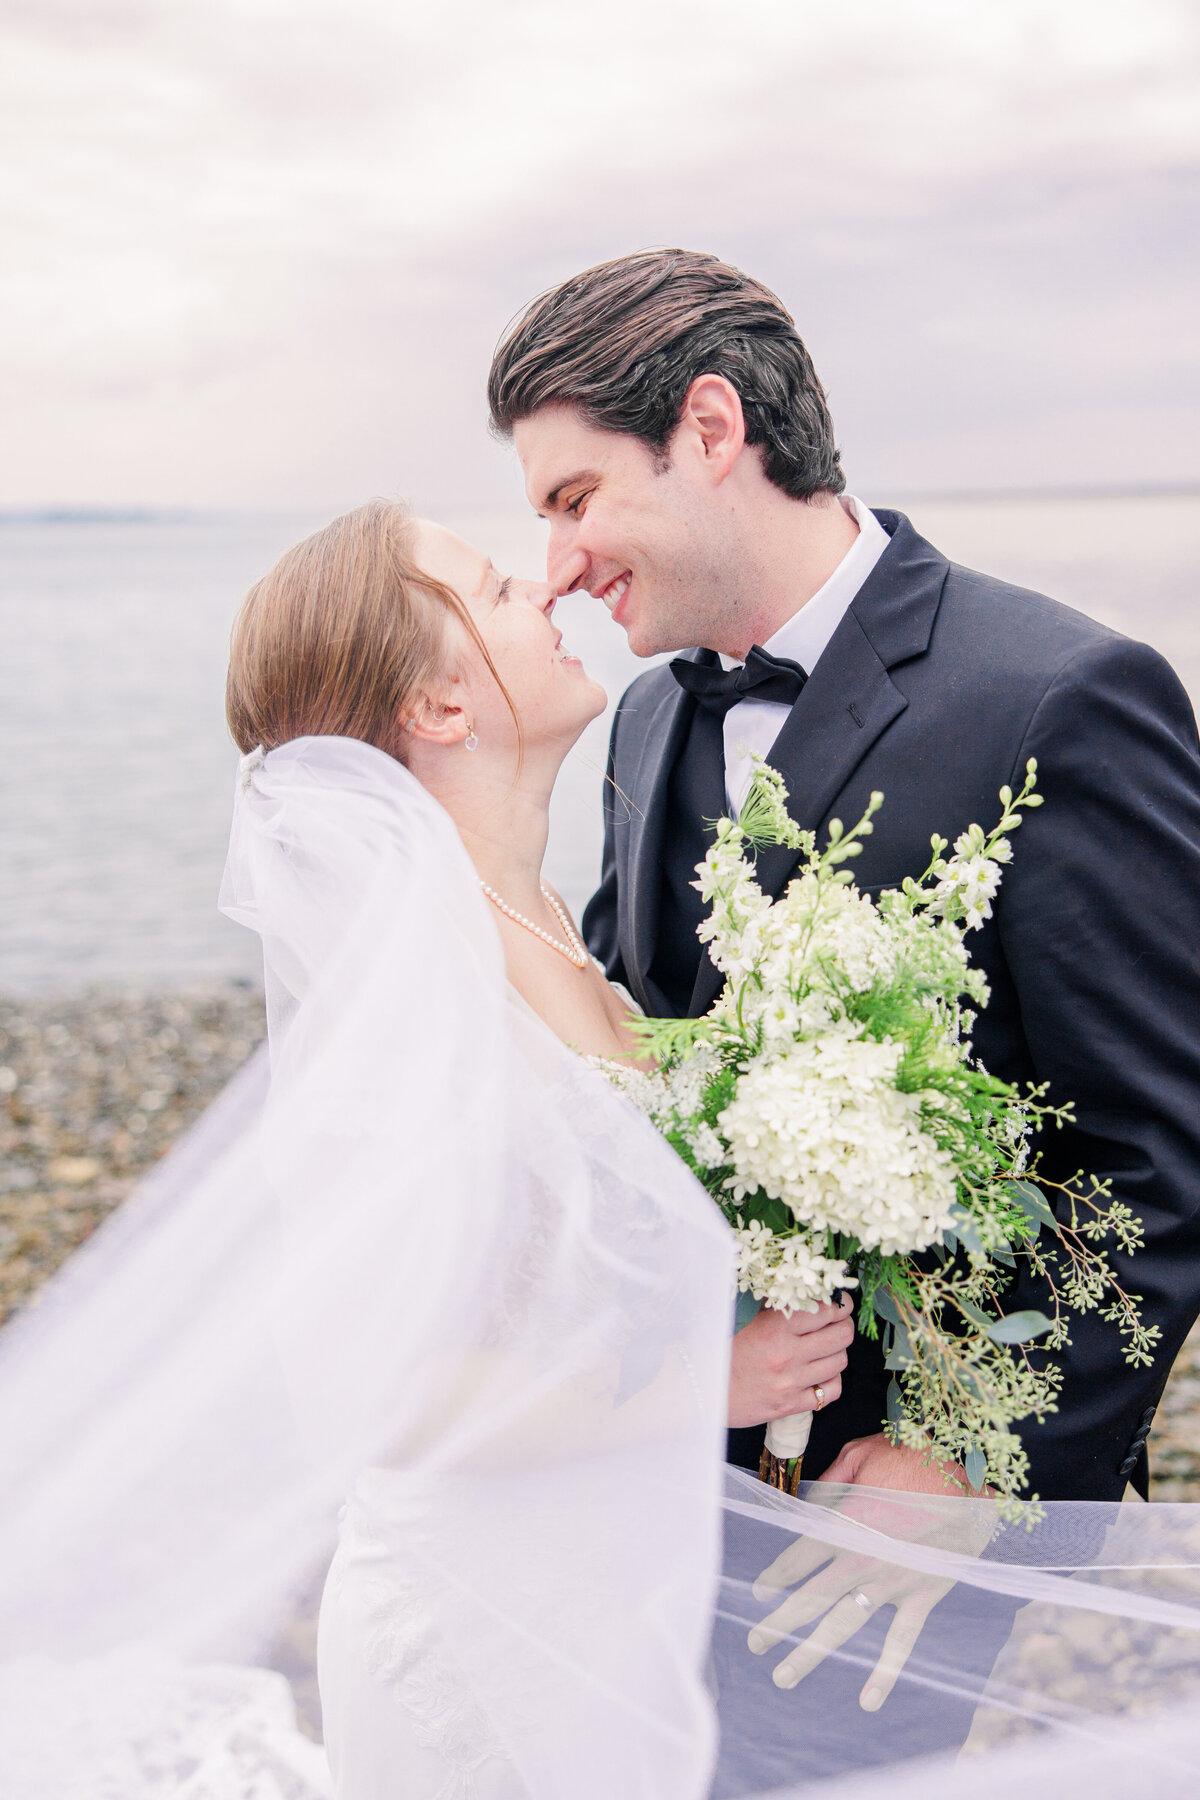 Bride and groom smiling with veil blowing in the breeze representing romantic Boston wedding images